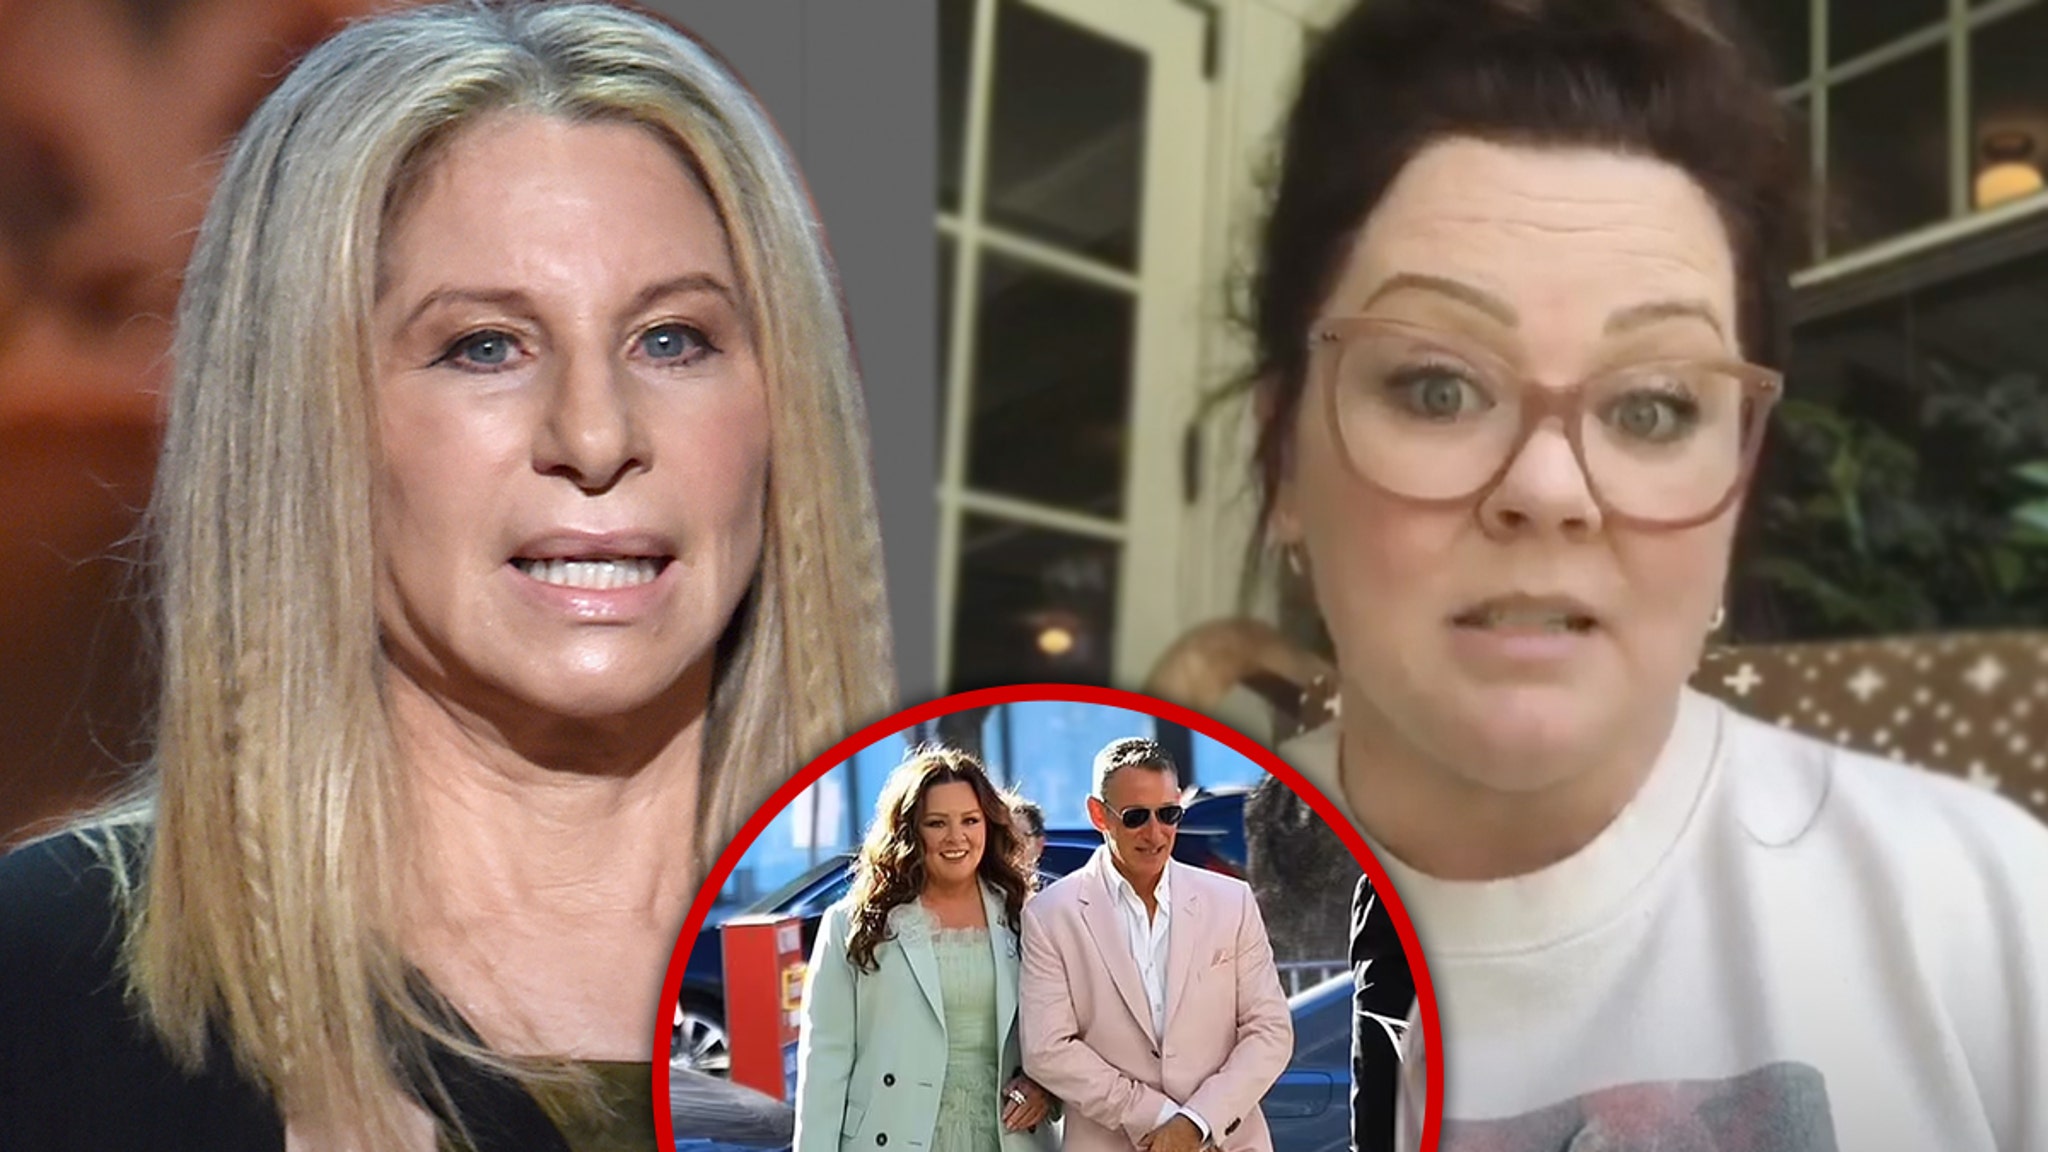 Barbra Streisand Catches Hell For Ozempic Remark to Melissa McCarthy